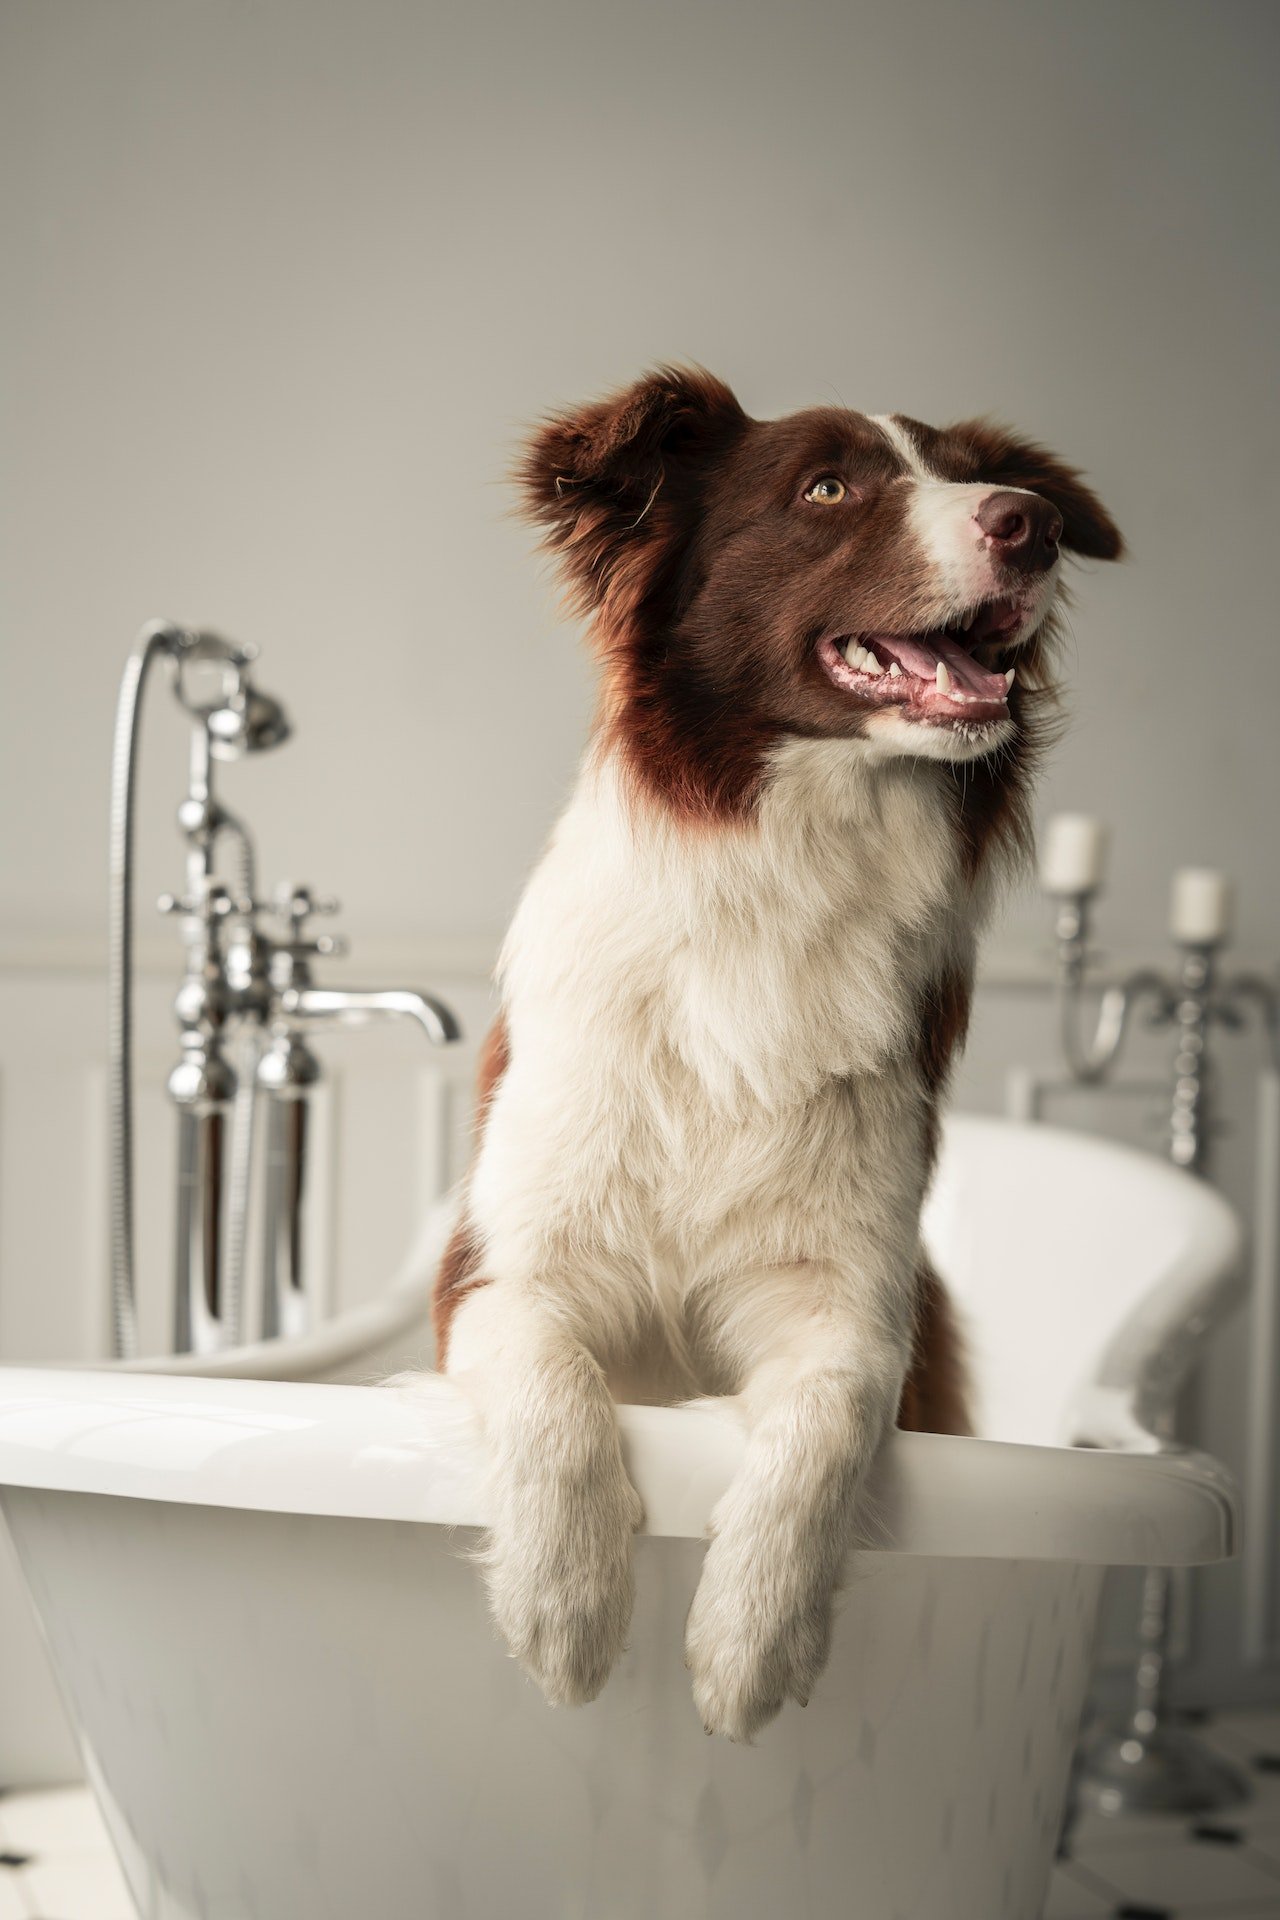 Suds and Scrubs: How Often Should You Bathe Your Dog?